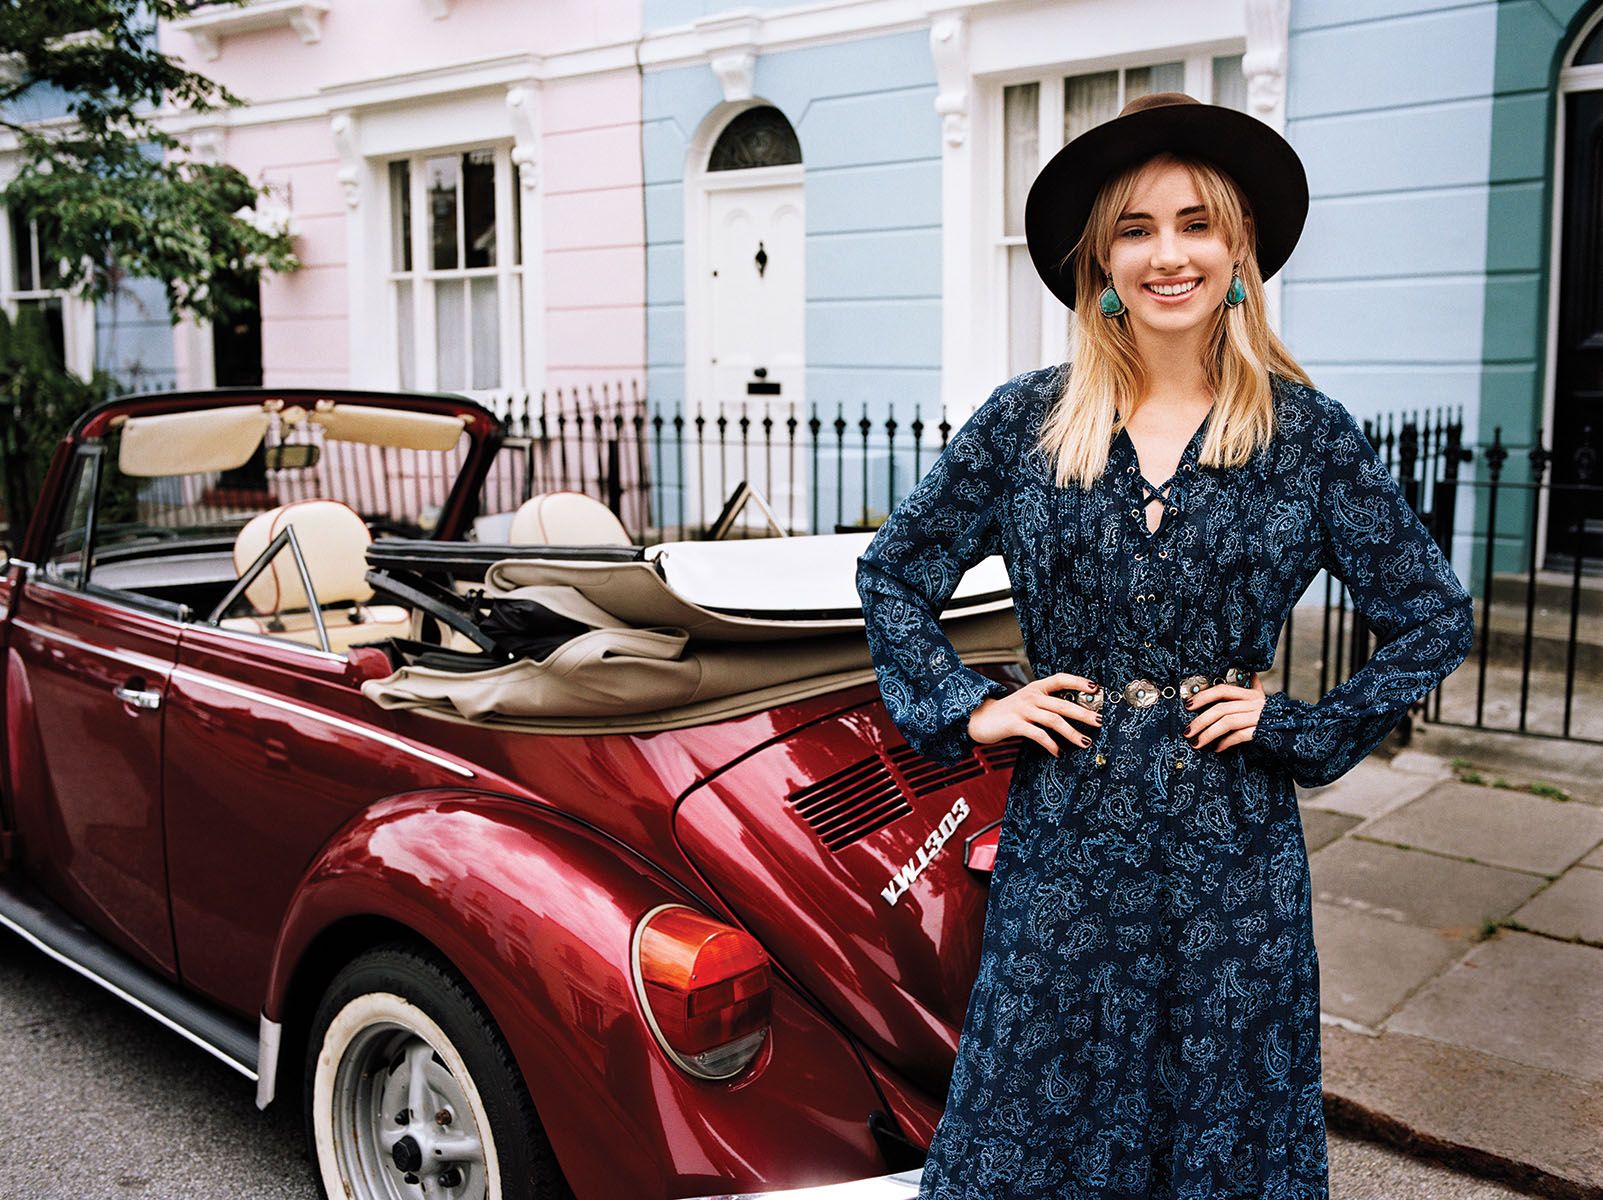 Find out why Popbela chose Suki and Immy Waterhouse as their favorite women!